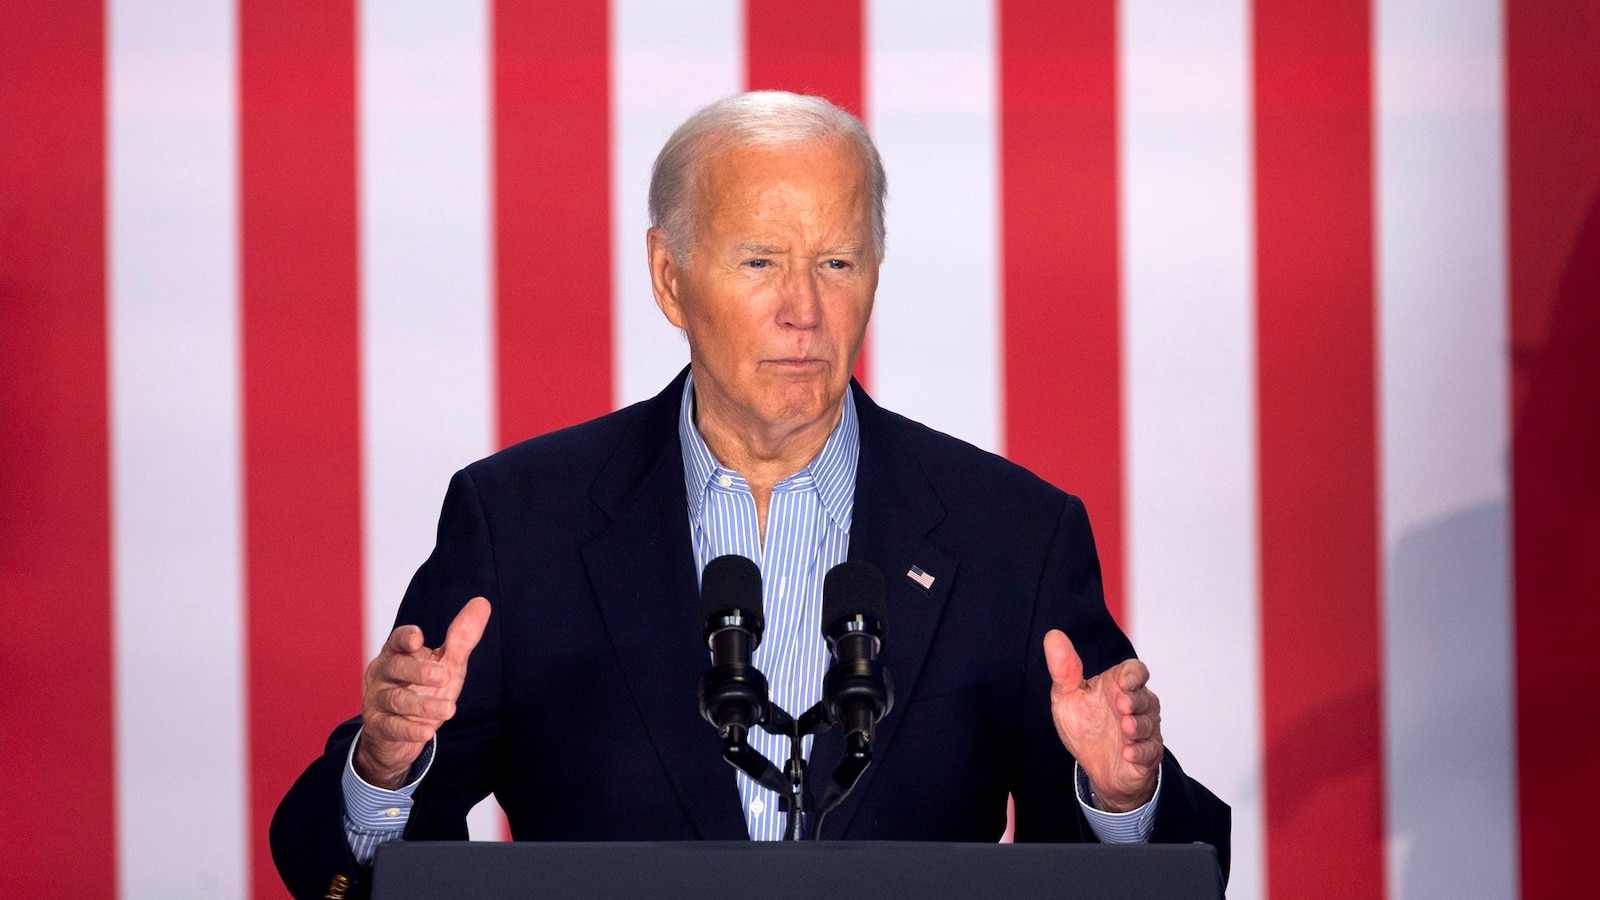 2nd radio host says they were given questions ahead of Biden interview